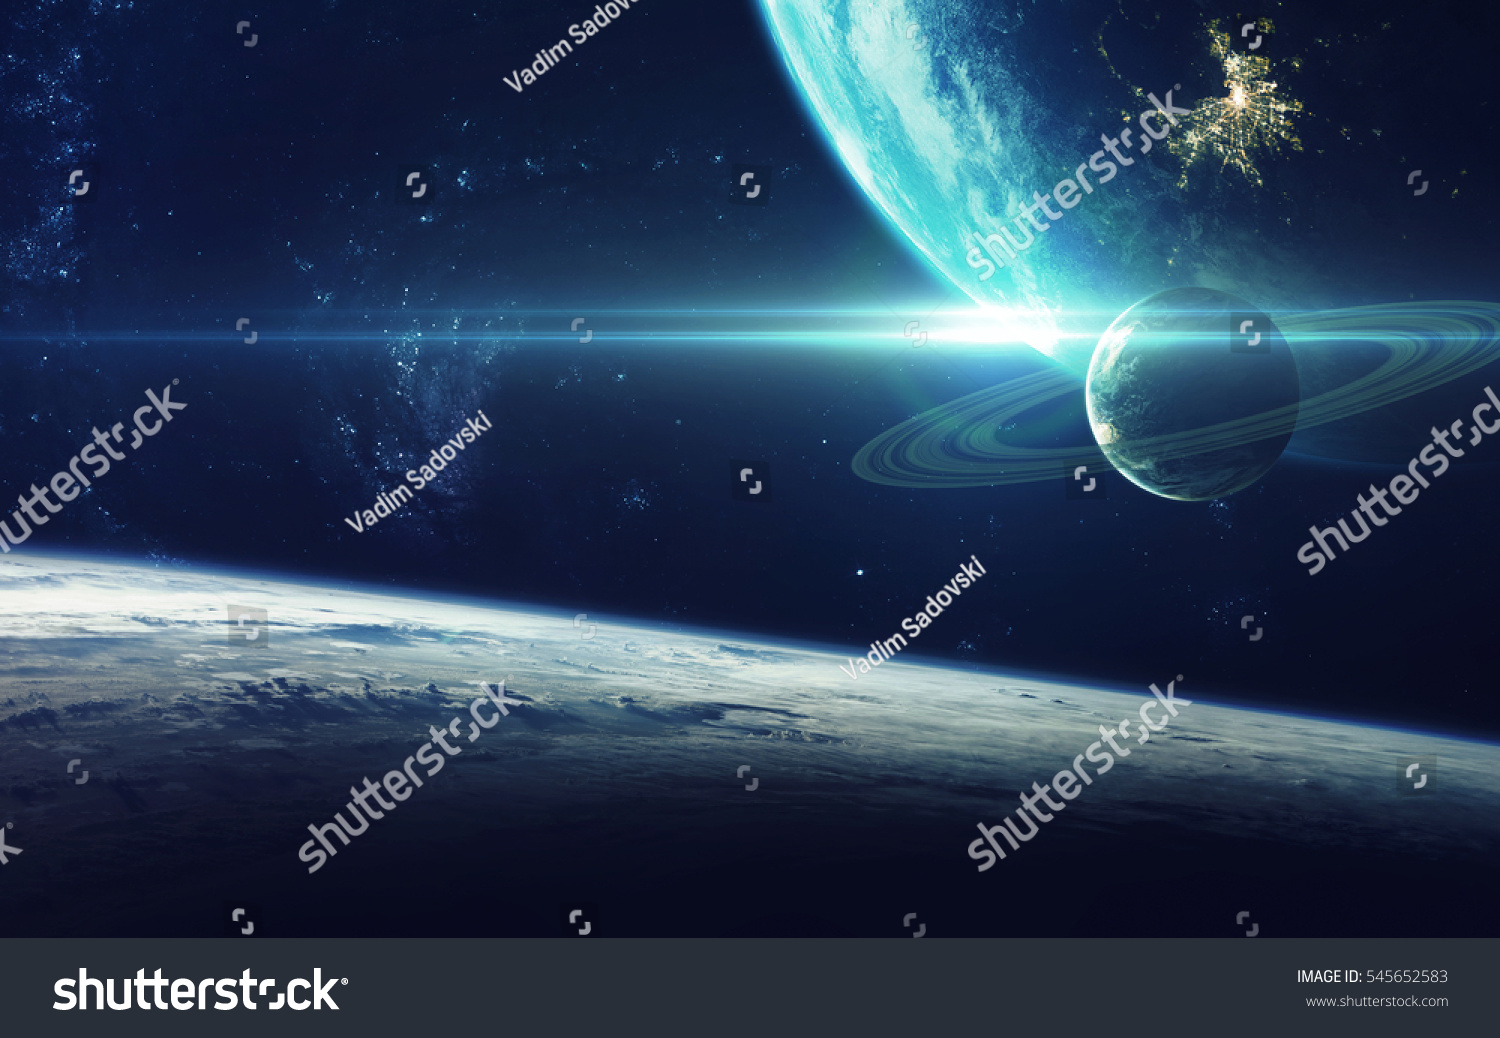 Cosmic art, science fiction wallpaper. Beauty of deep space. Billions of galaxies in the universe. Elements of this image furnished by NASA #545652583